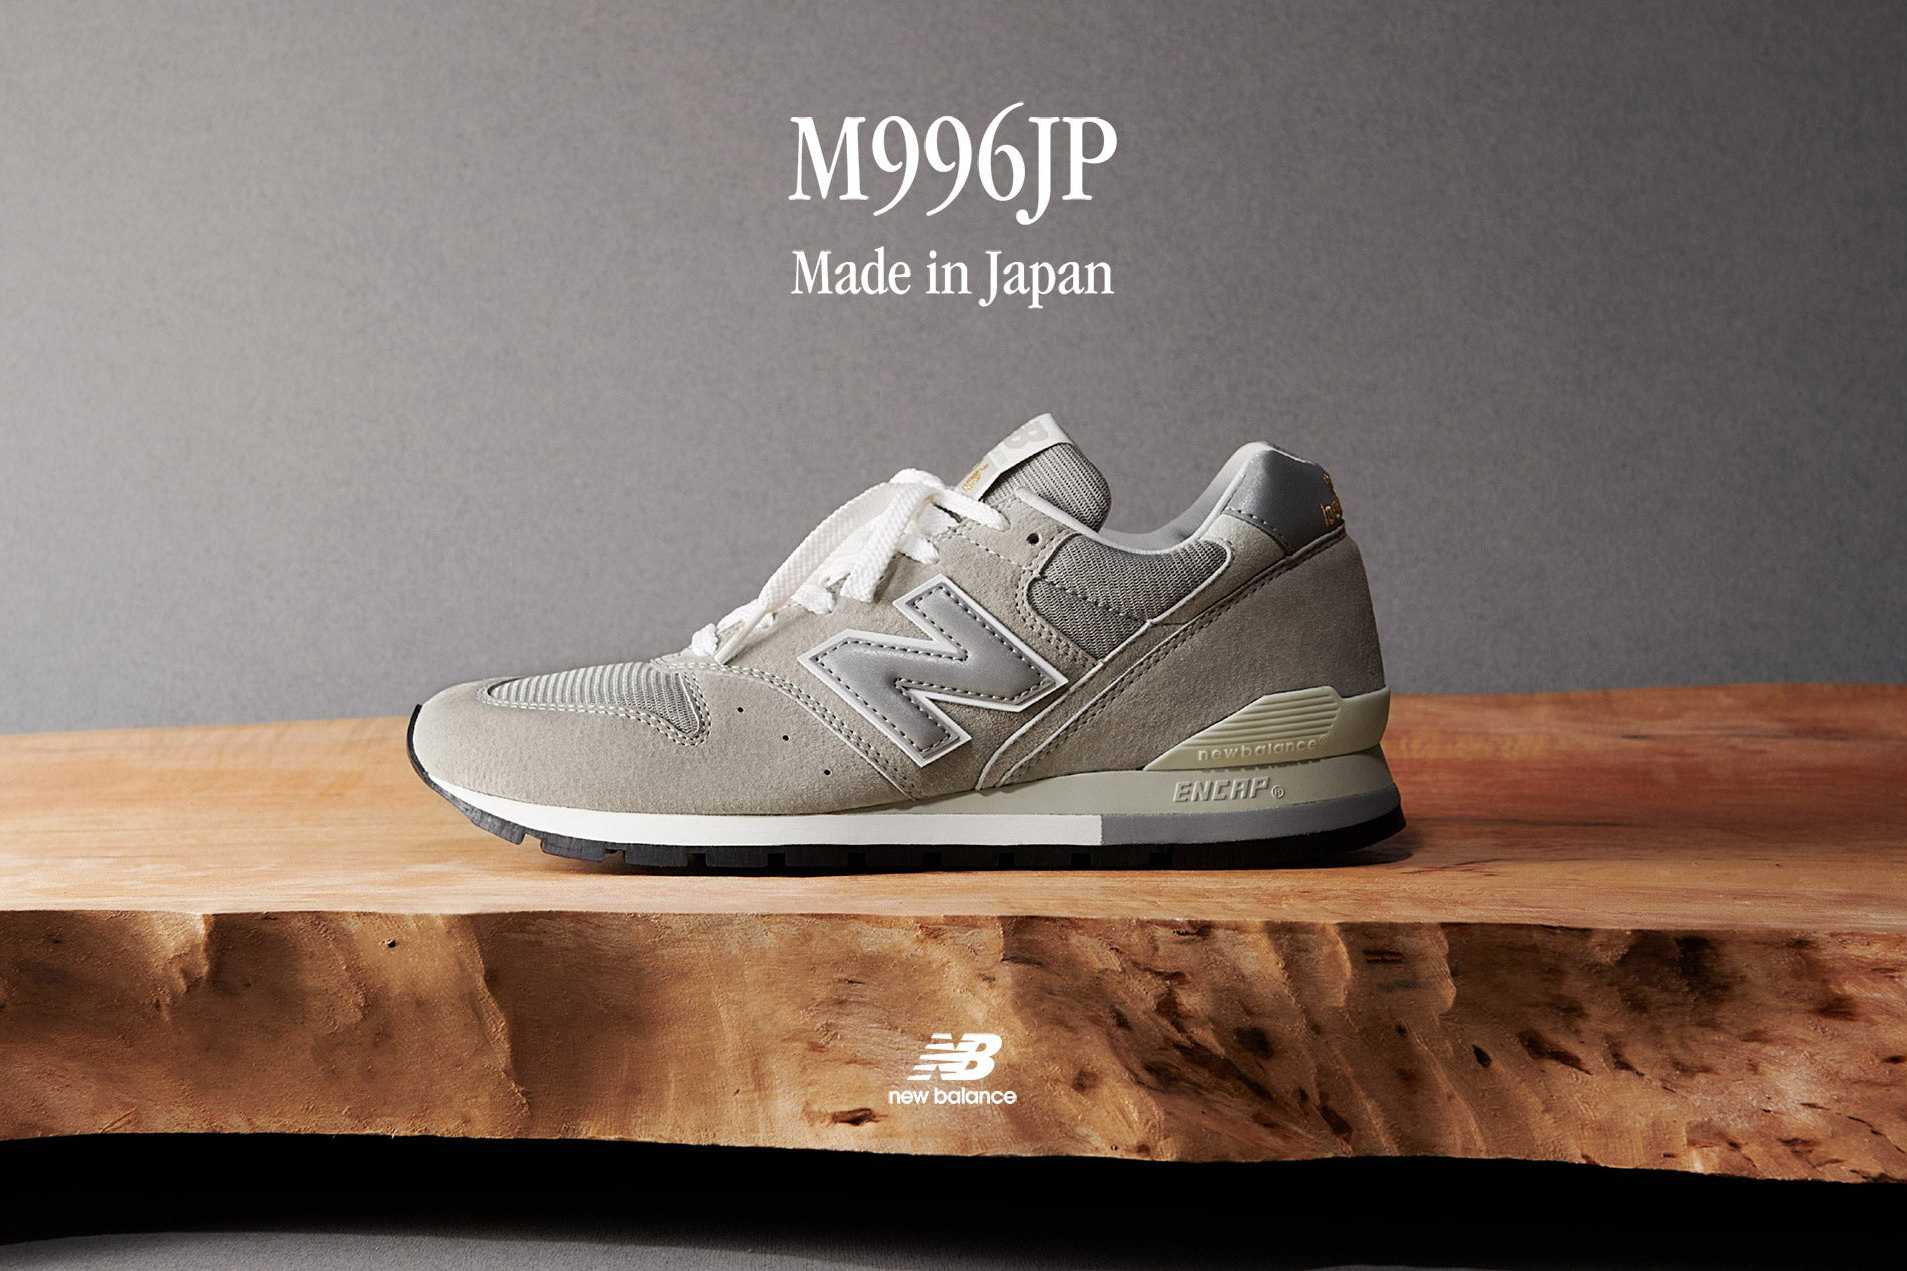 Photos of New Balance's 996 made in Japan sneaker in the grey colorway